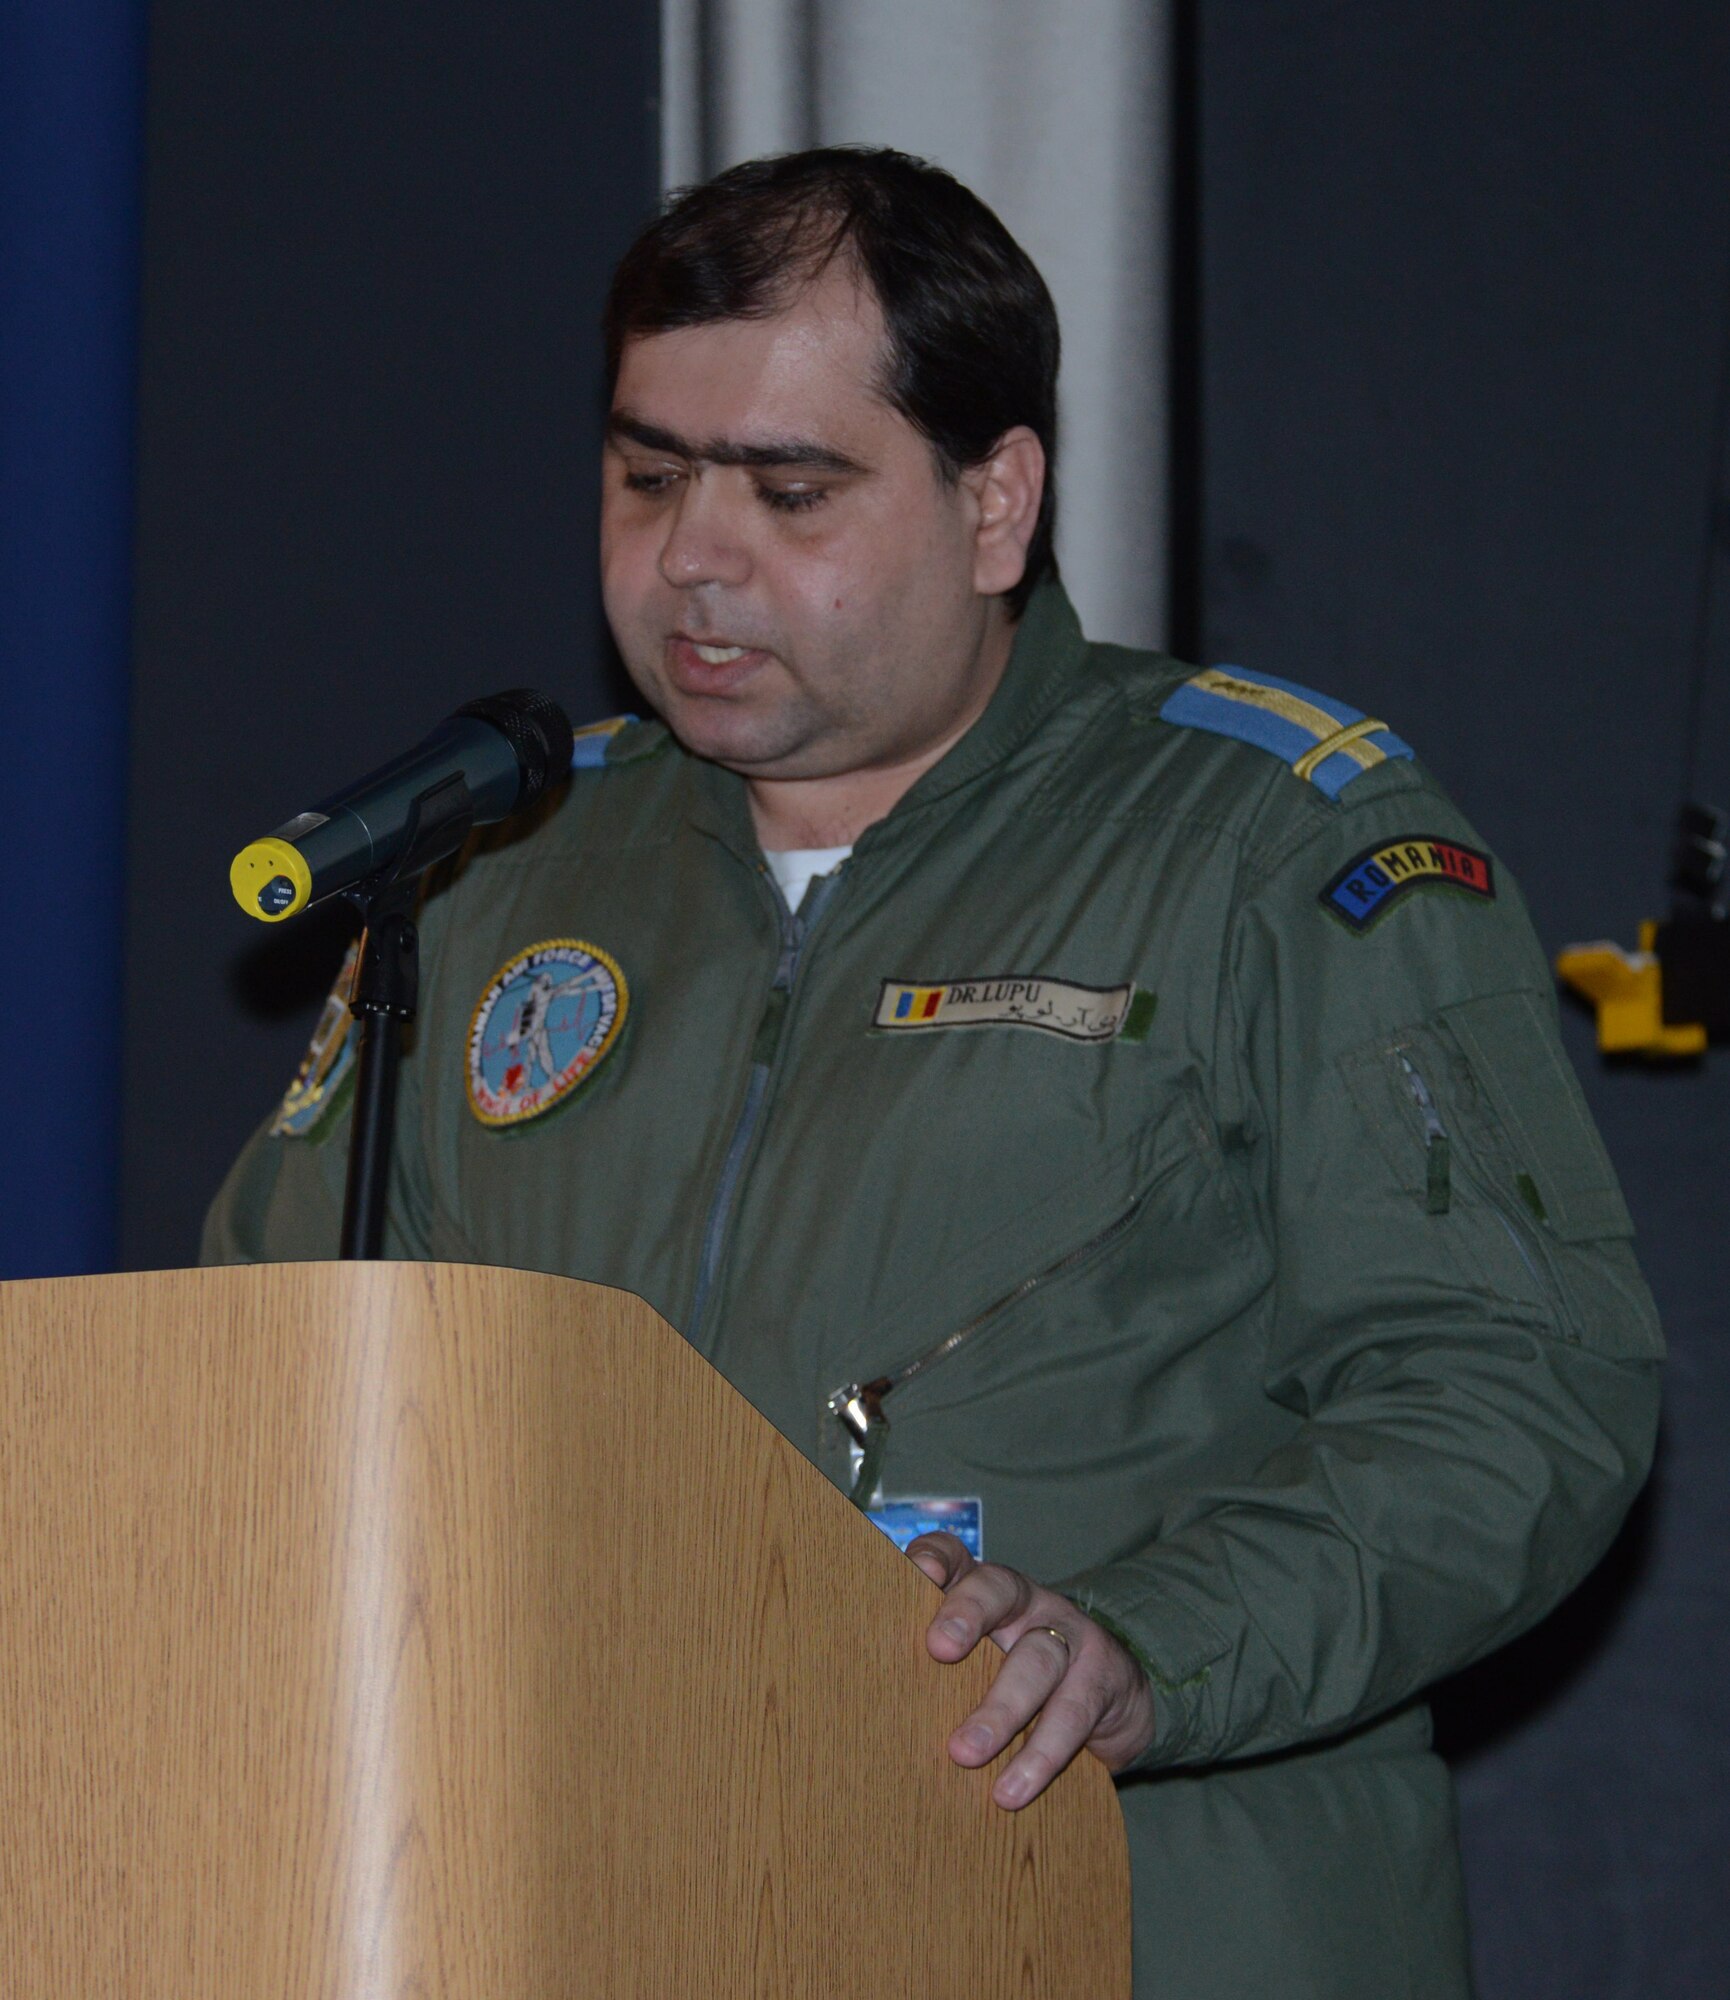 RAMSTEIN AIR BASE, Germany – Maj. Leonard I. Lupu, a Romanian air force flight surgeon, shares the history of Romanian flight medicine with more than 170 medical professionals at the 29th Annual Aerospace Medicine Summit and NATO Science and Technology Organization Technical Course at the Hercules Theater here March 11, 2014. Lupu has attended the summit five times and said he’s thankful for the partnership Romania has with U.S. Air Forces in Europe and Air Forces Africa, as well as NATO.   (U.S. Air Force Photo by Tech. Sgt. James M. Hodgman)